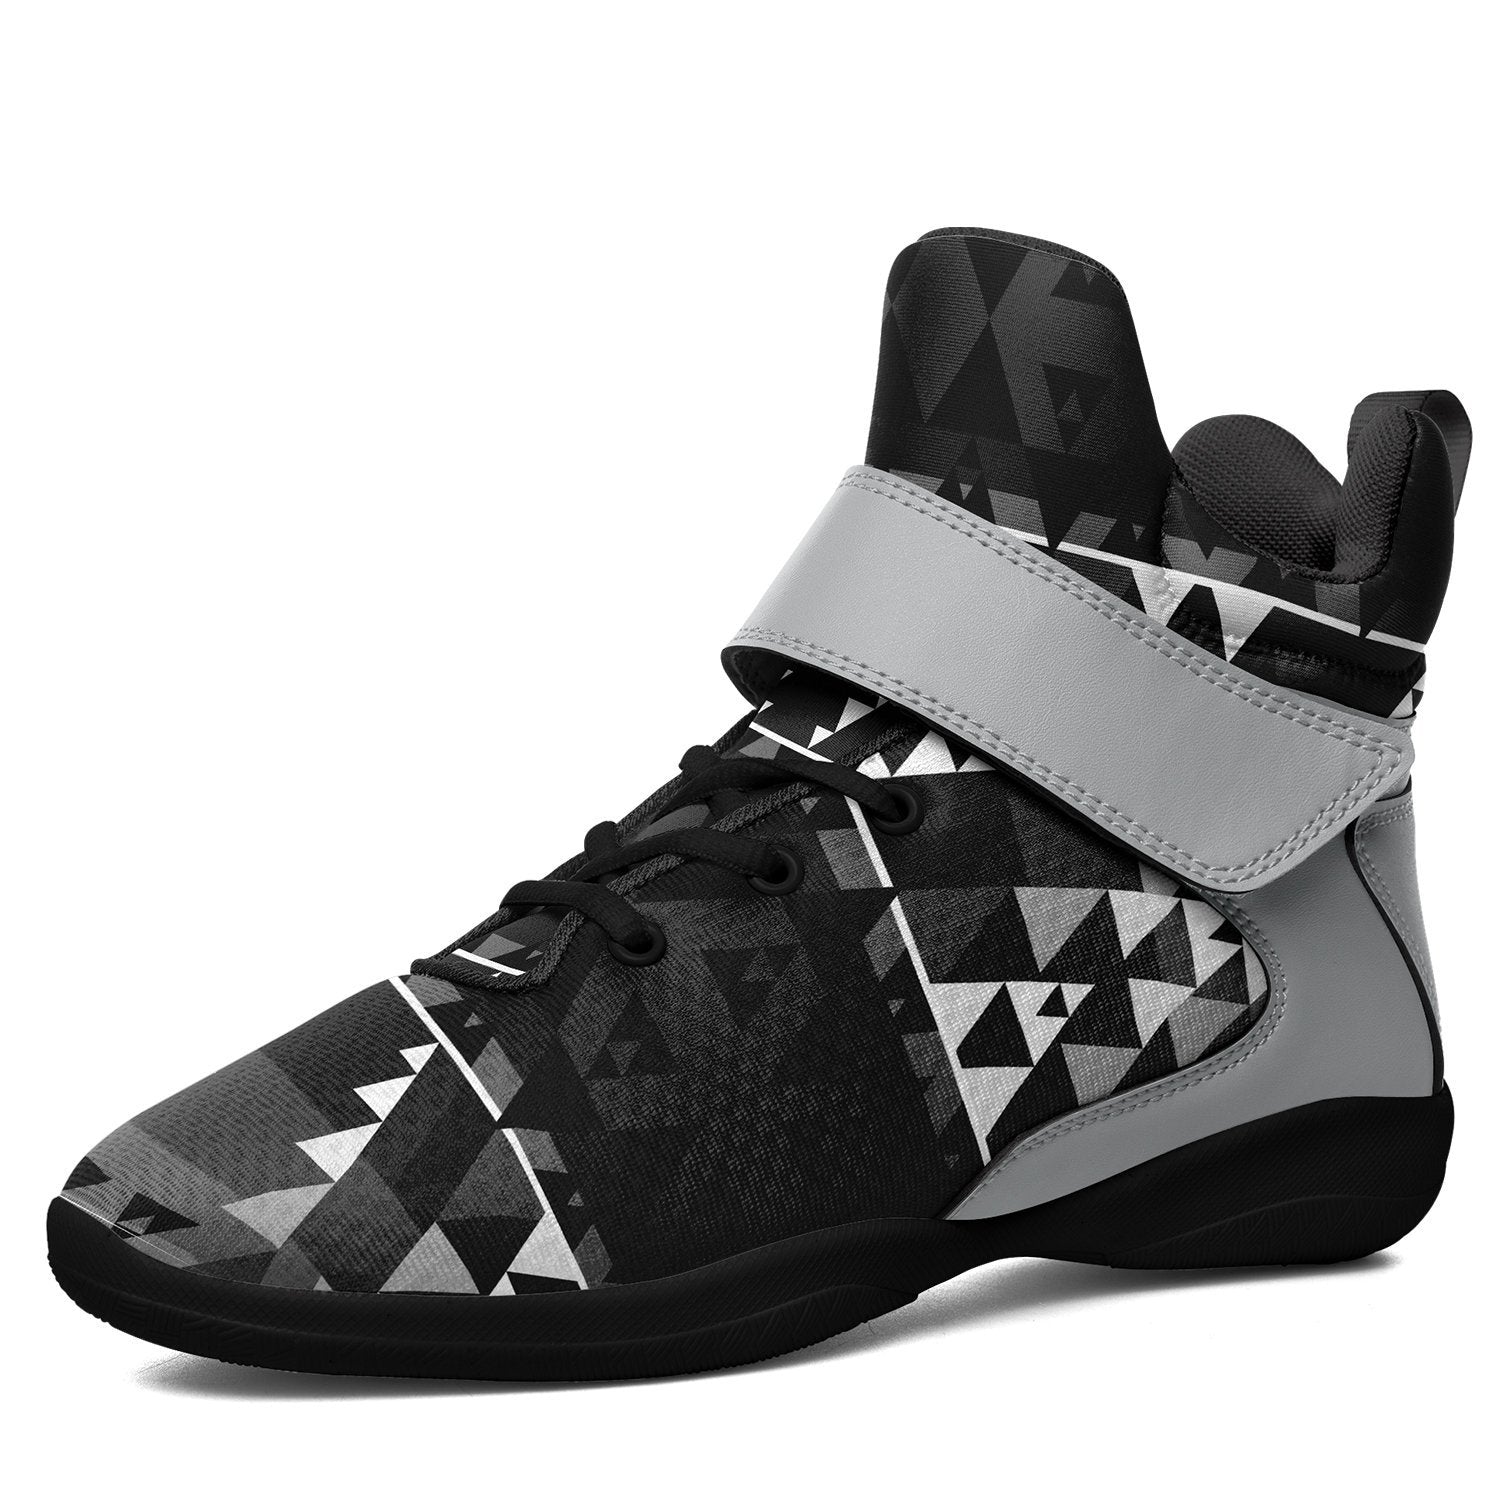 Writing on Stone Black and White Ipottaa Basketball / Sport High Top Shoes - Black Sole 49 Dzine US Men 7 / EUR 40 Black Sole with Gray Strap 